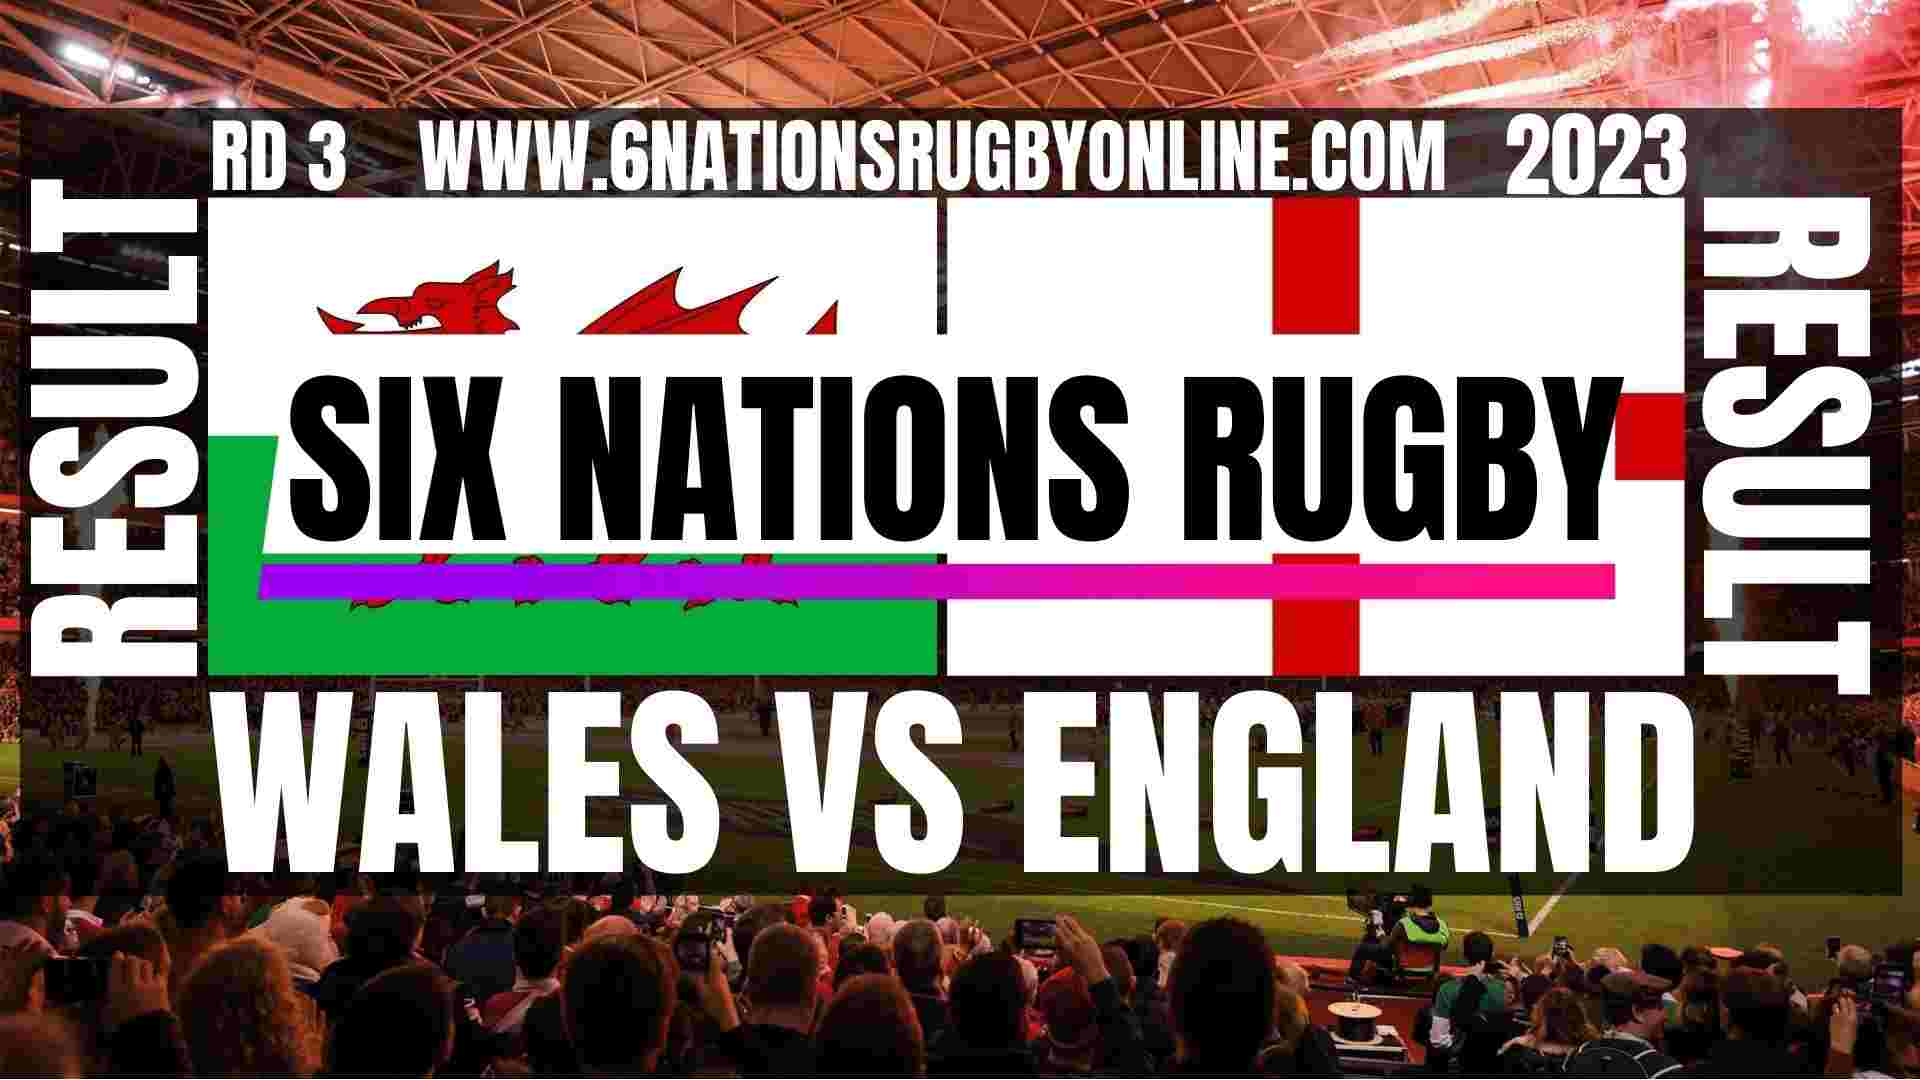 Wales vs England RD 3 Result 2023 | Six Nations Rugby